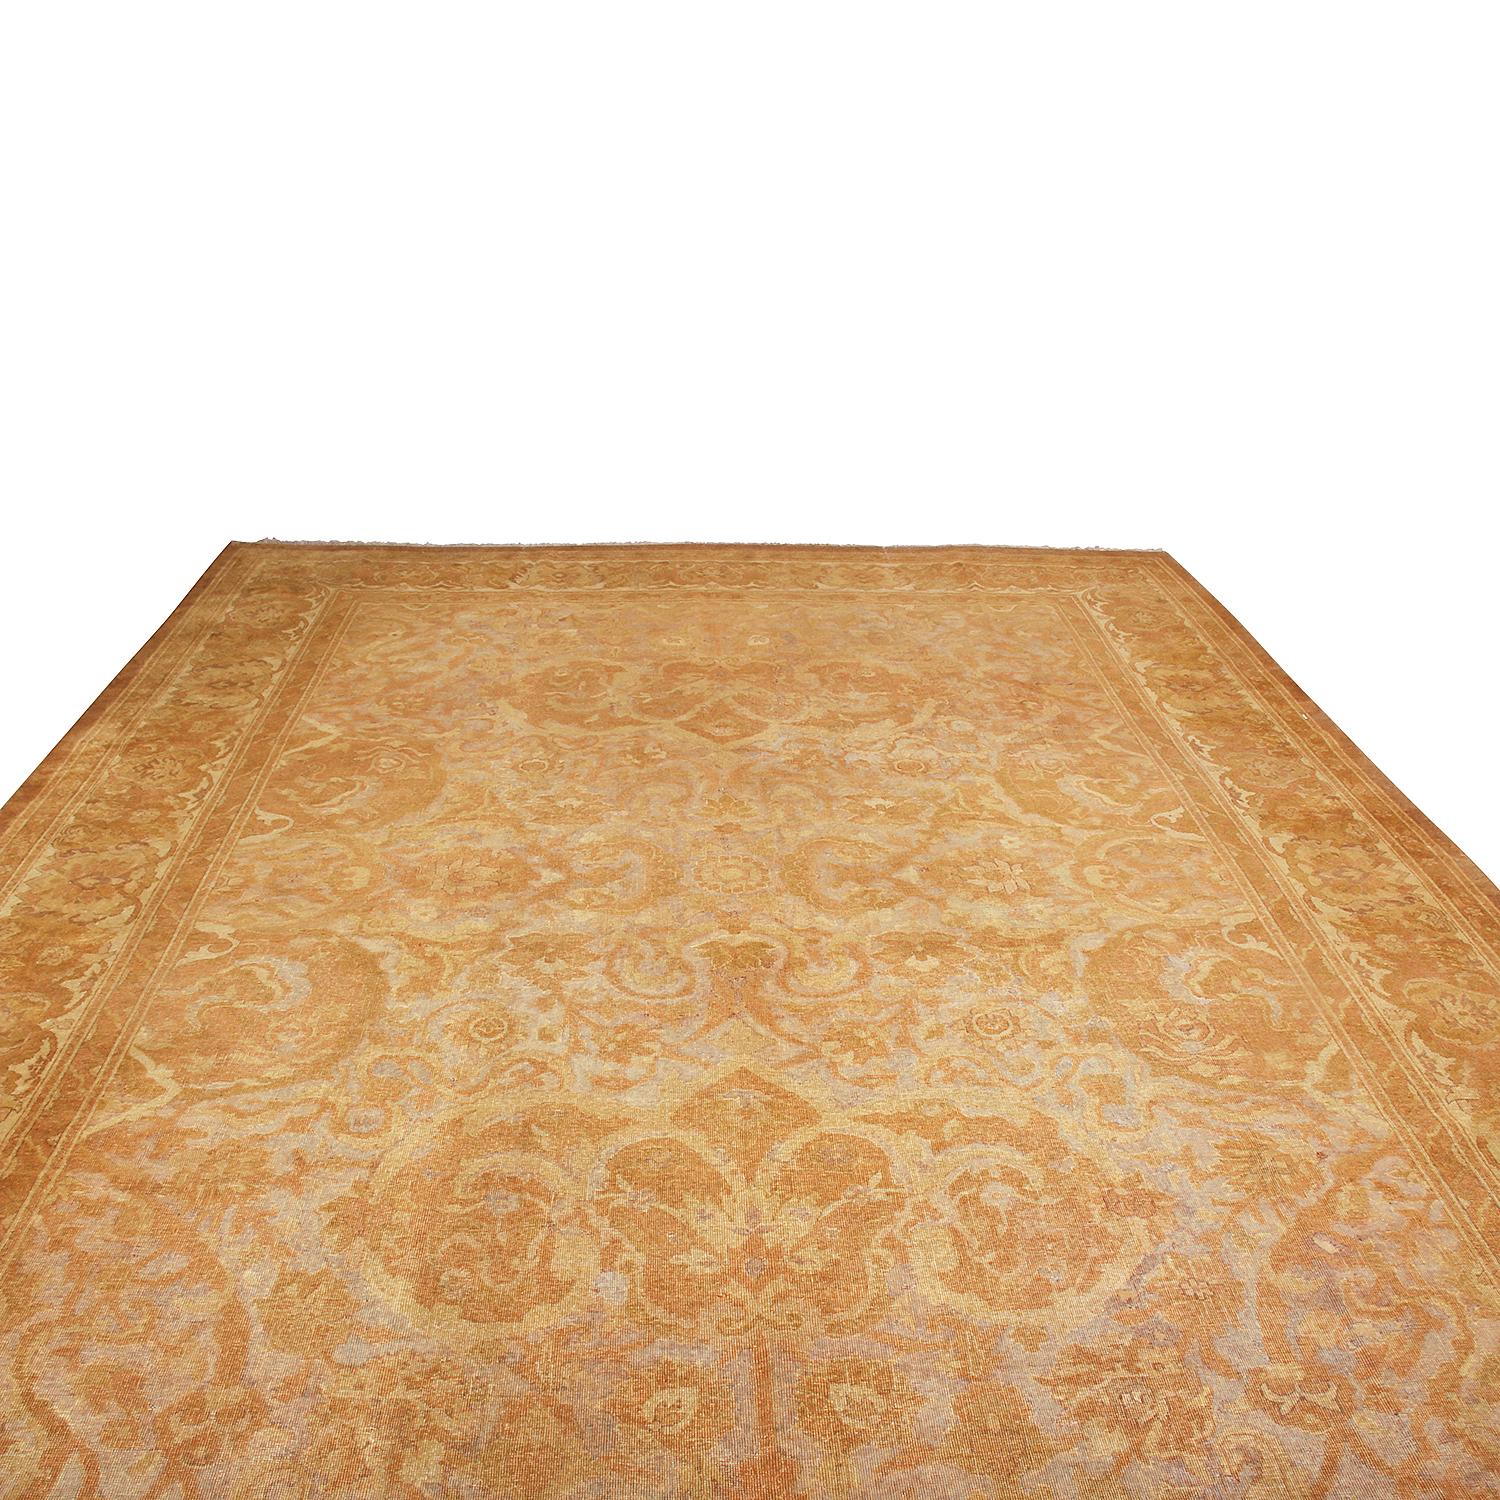 Hand knotted originating from India between 1880-1890, this antique Amritsar wool rug enjoys a distinguished marriage of classic oriental elements with European influences, notable in both the grand soaring floral patterns (with highlights of